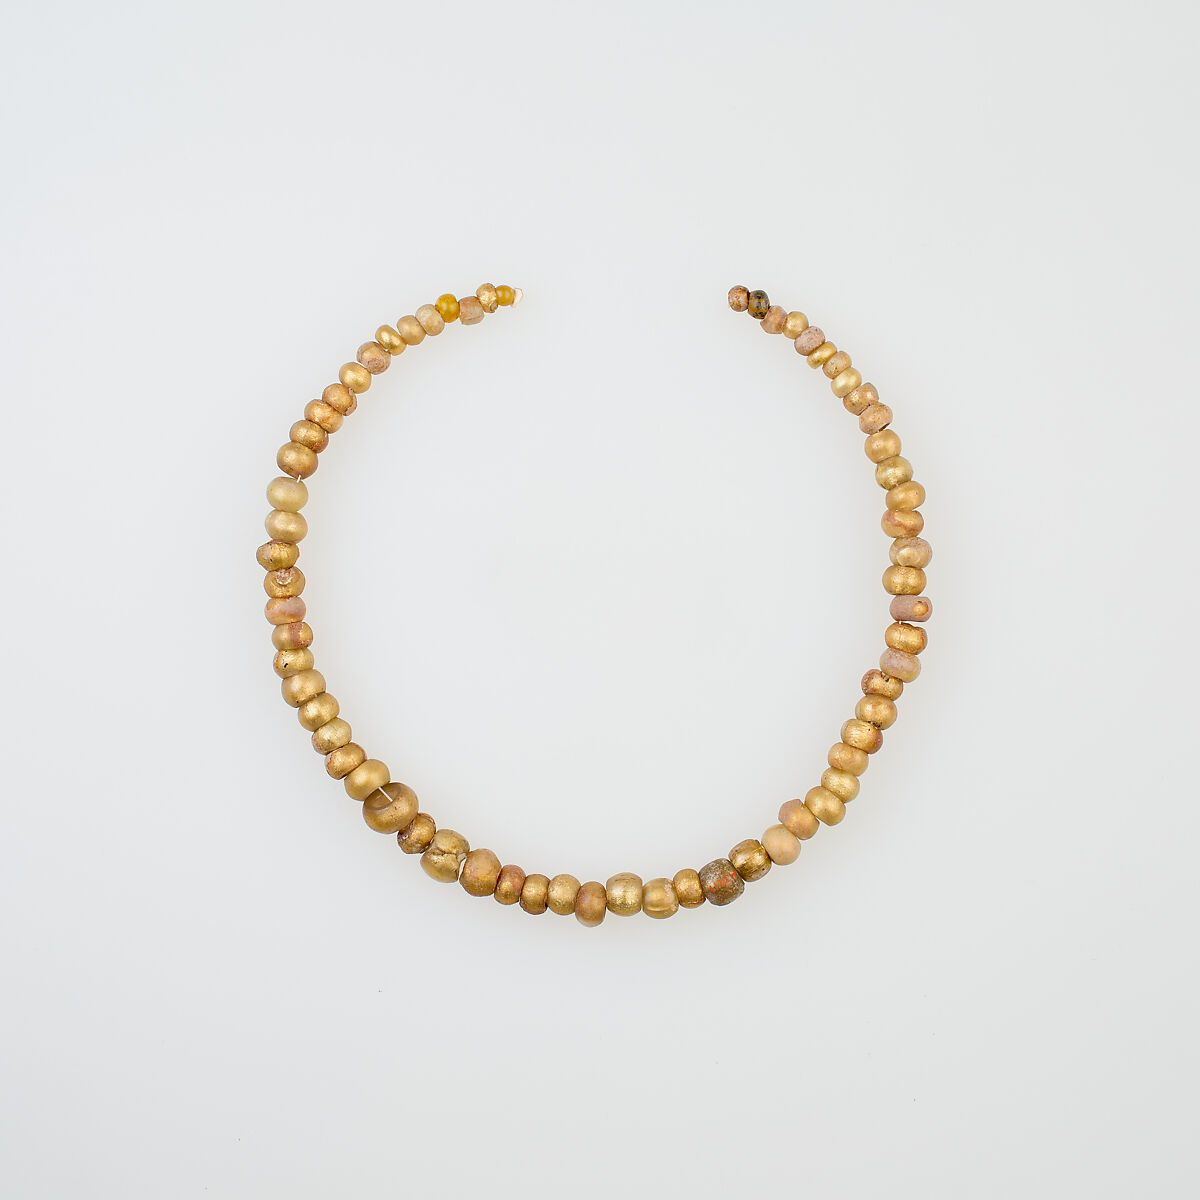 String of 65 Beads, glass, gold foil 